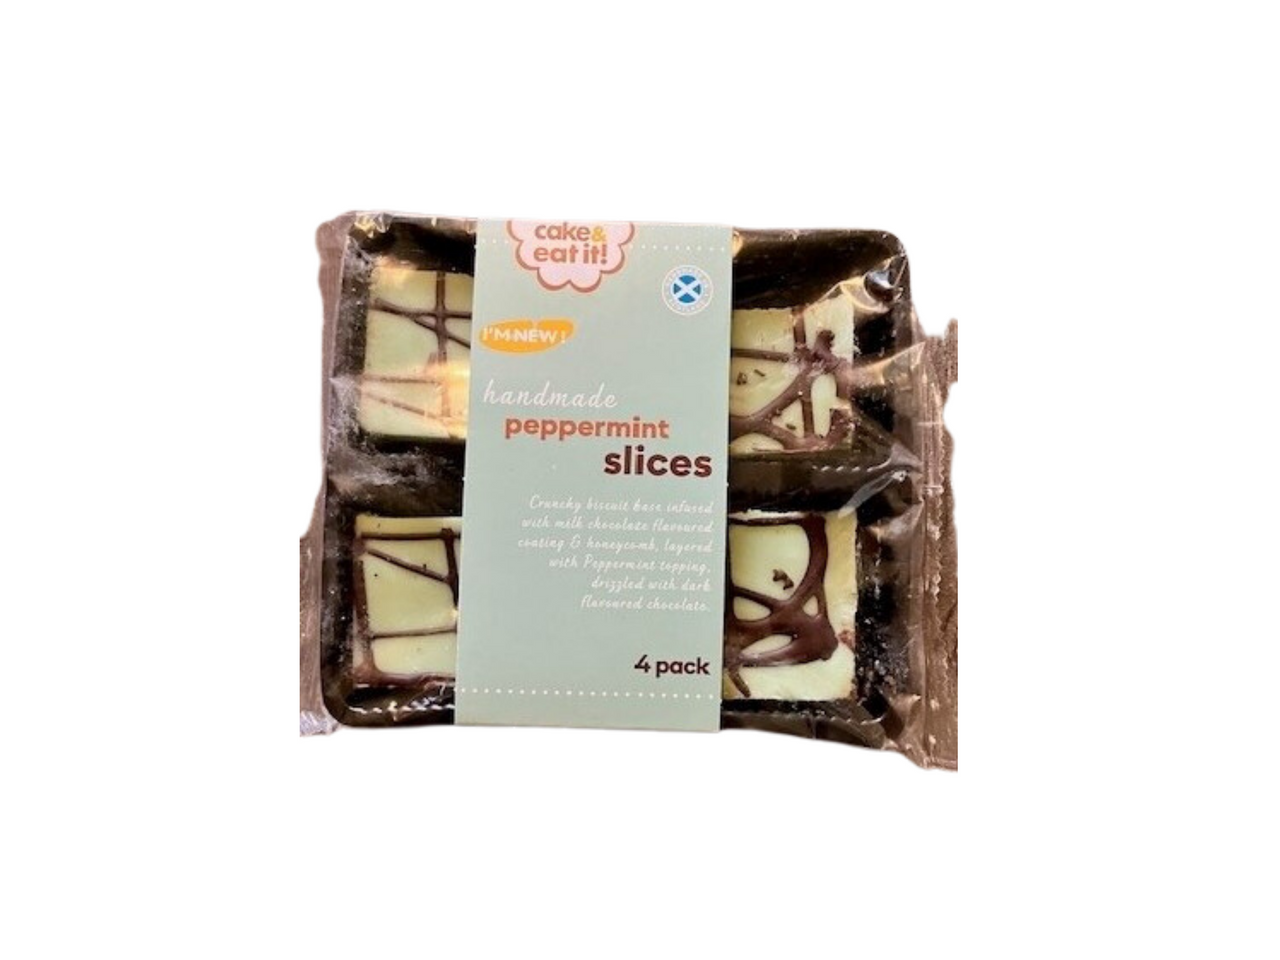 Cake & Eat It! Peppermint Slices 4 Pack (Sep 23) RRP £1.49 CLEARANCE XL 89p or 2 for £1.50